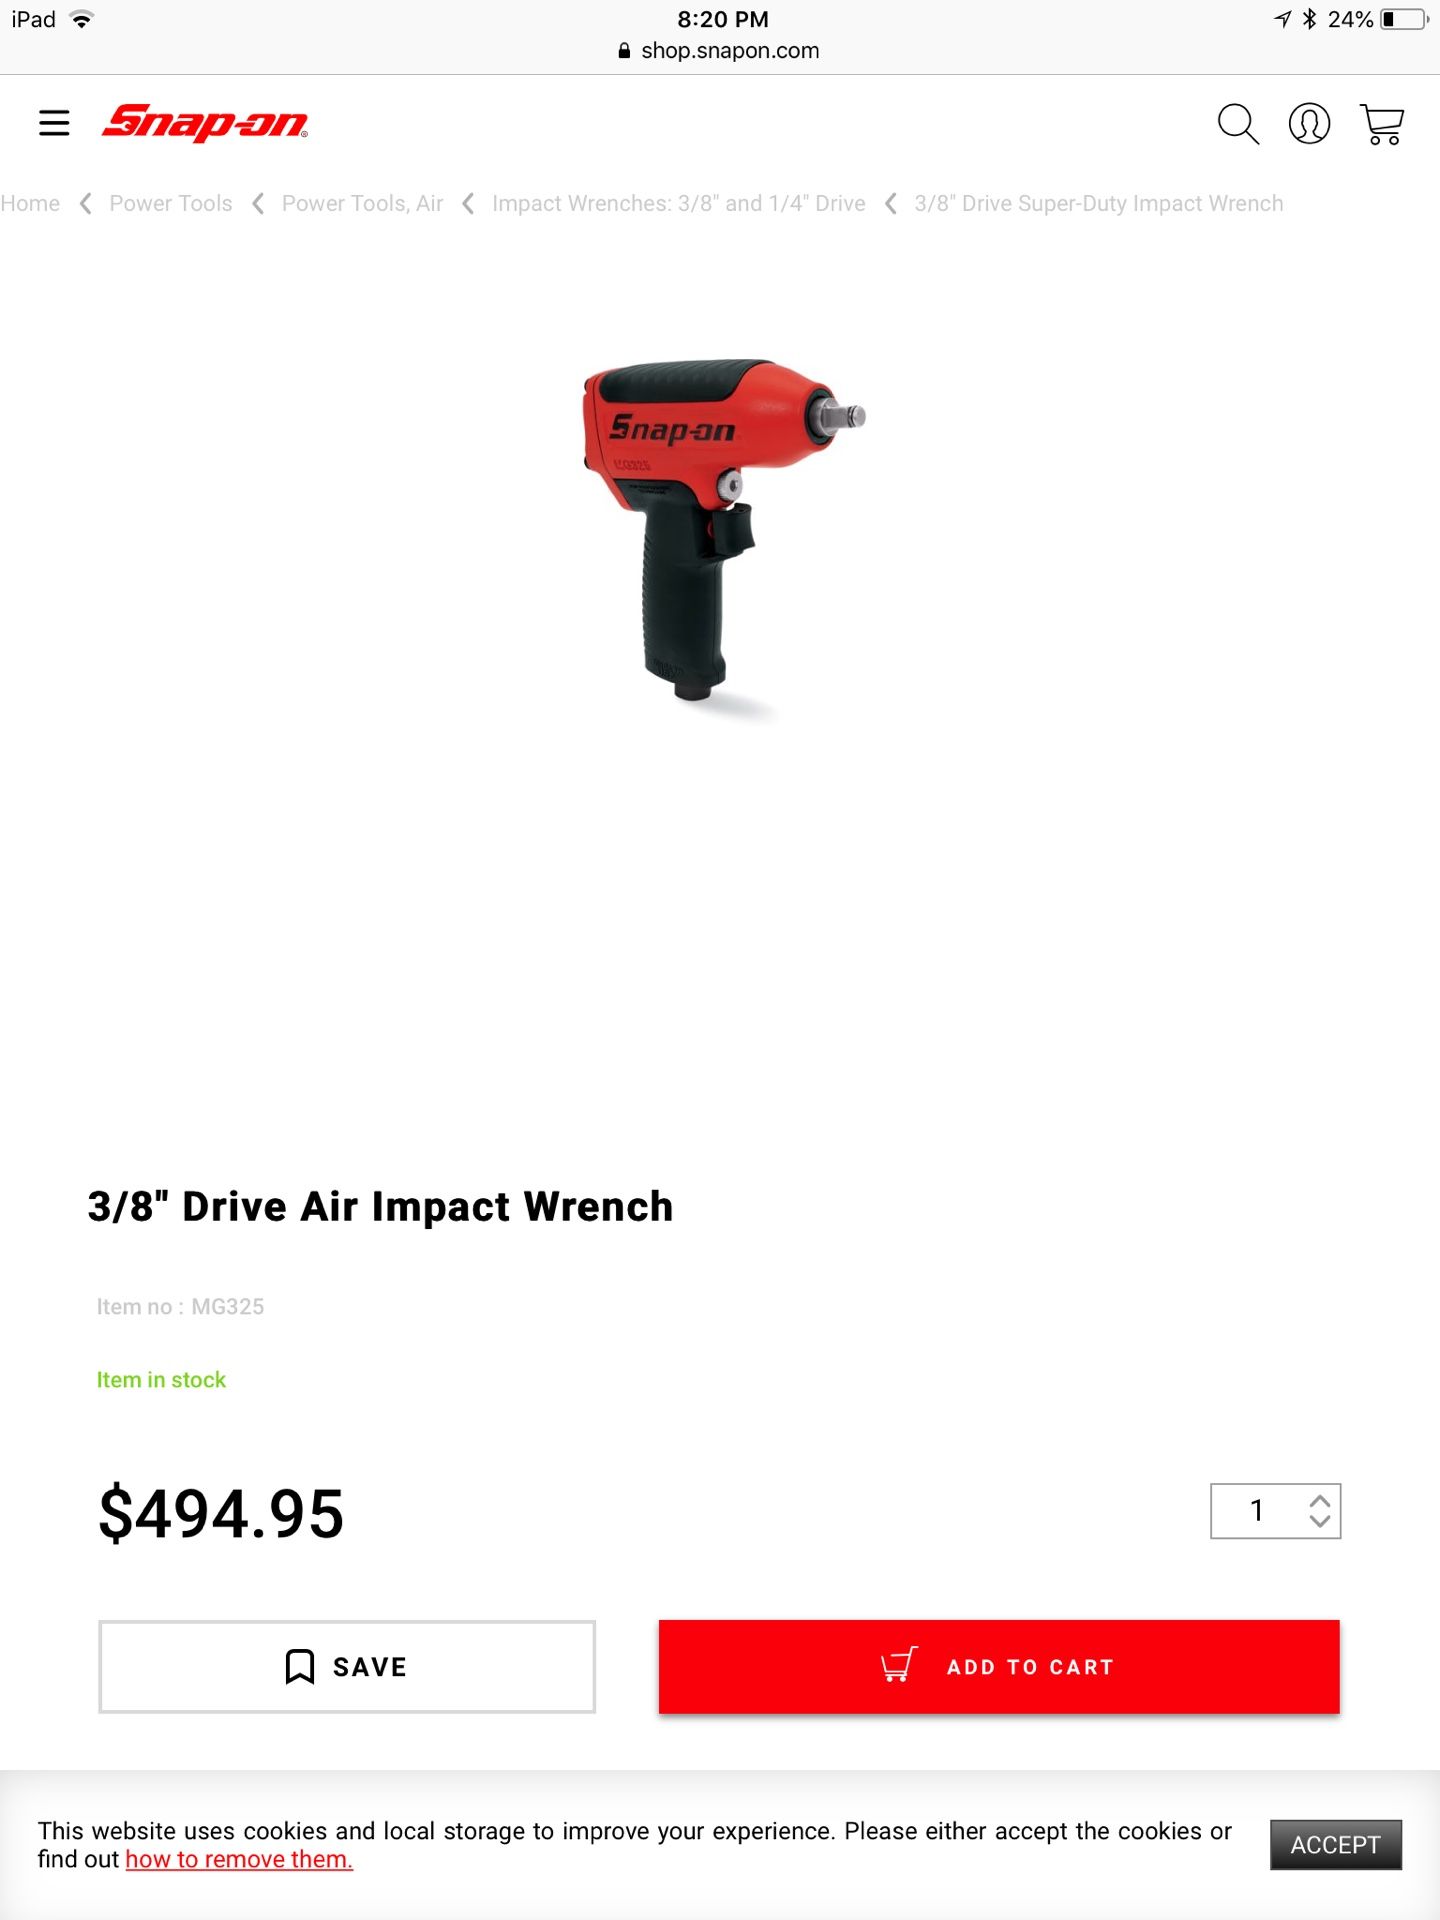 Snap on air impact ratchet tool